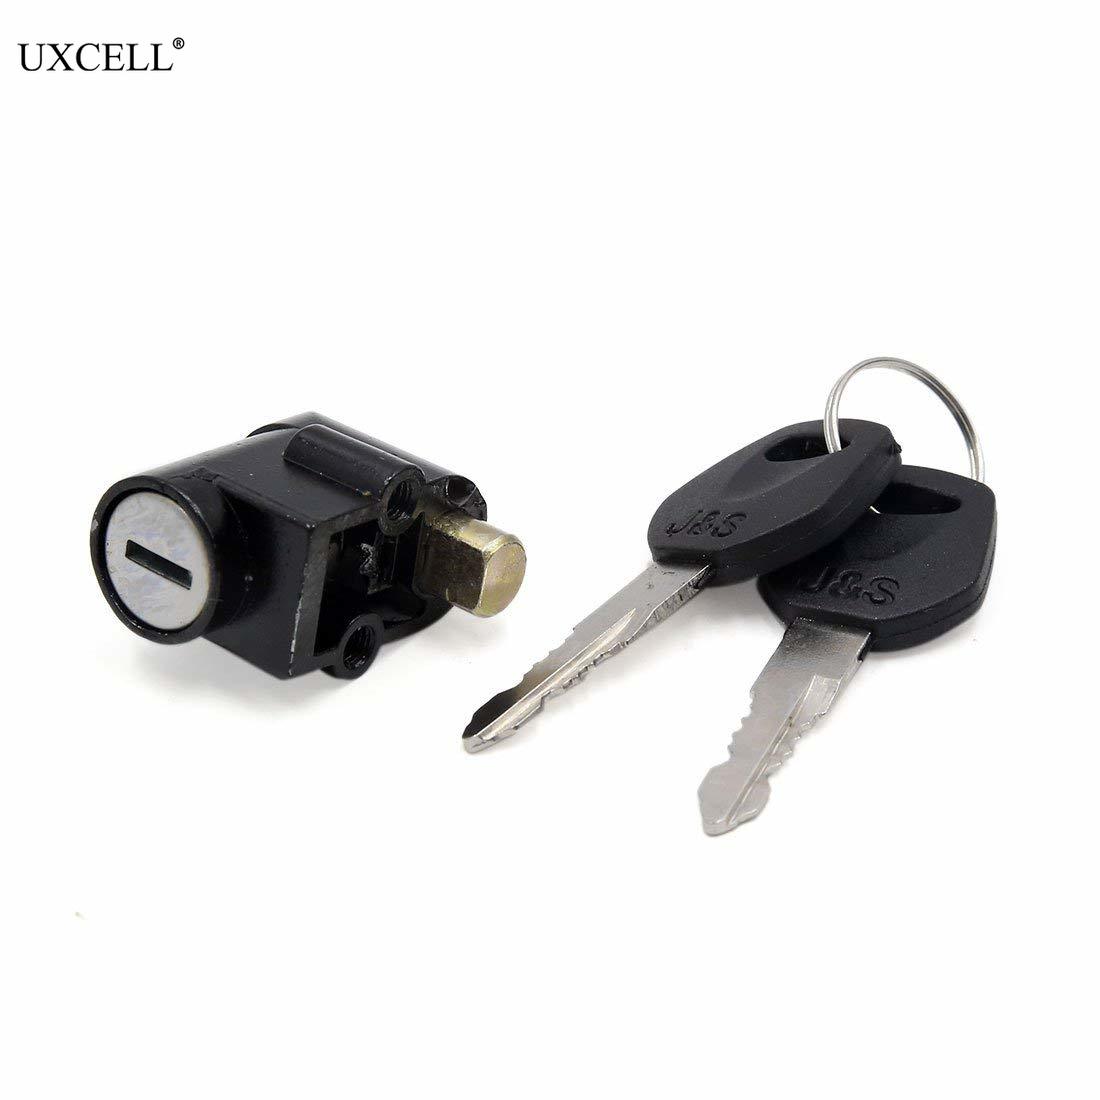 Uxcell Stainless Steel Motorcycle Steering Lock w Two Keys for Suzuki GN125 Black